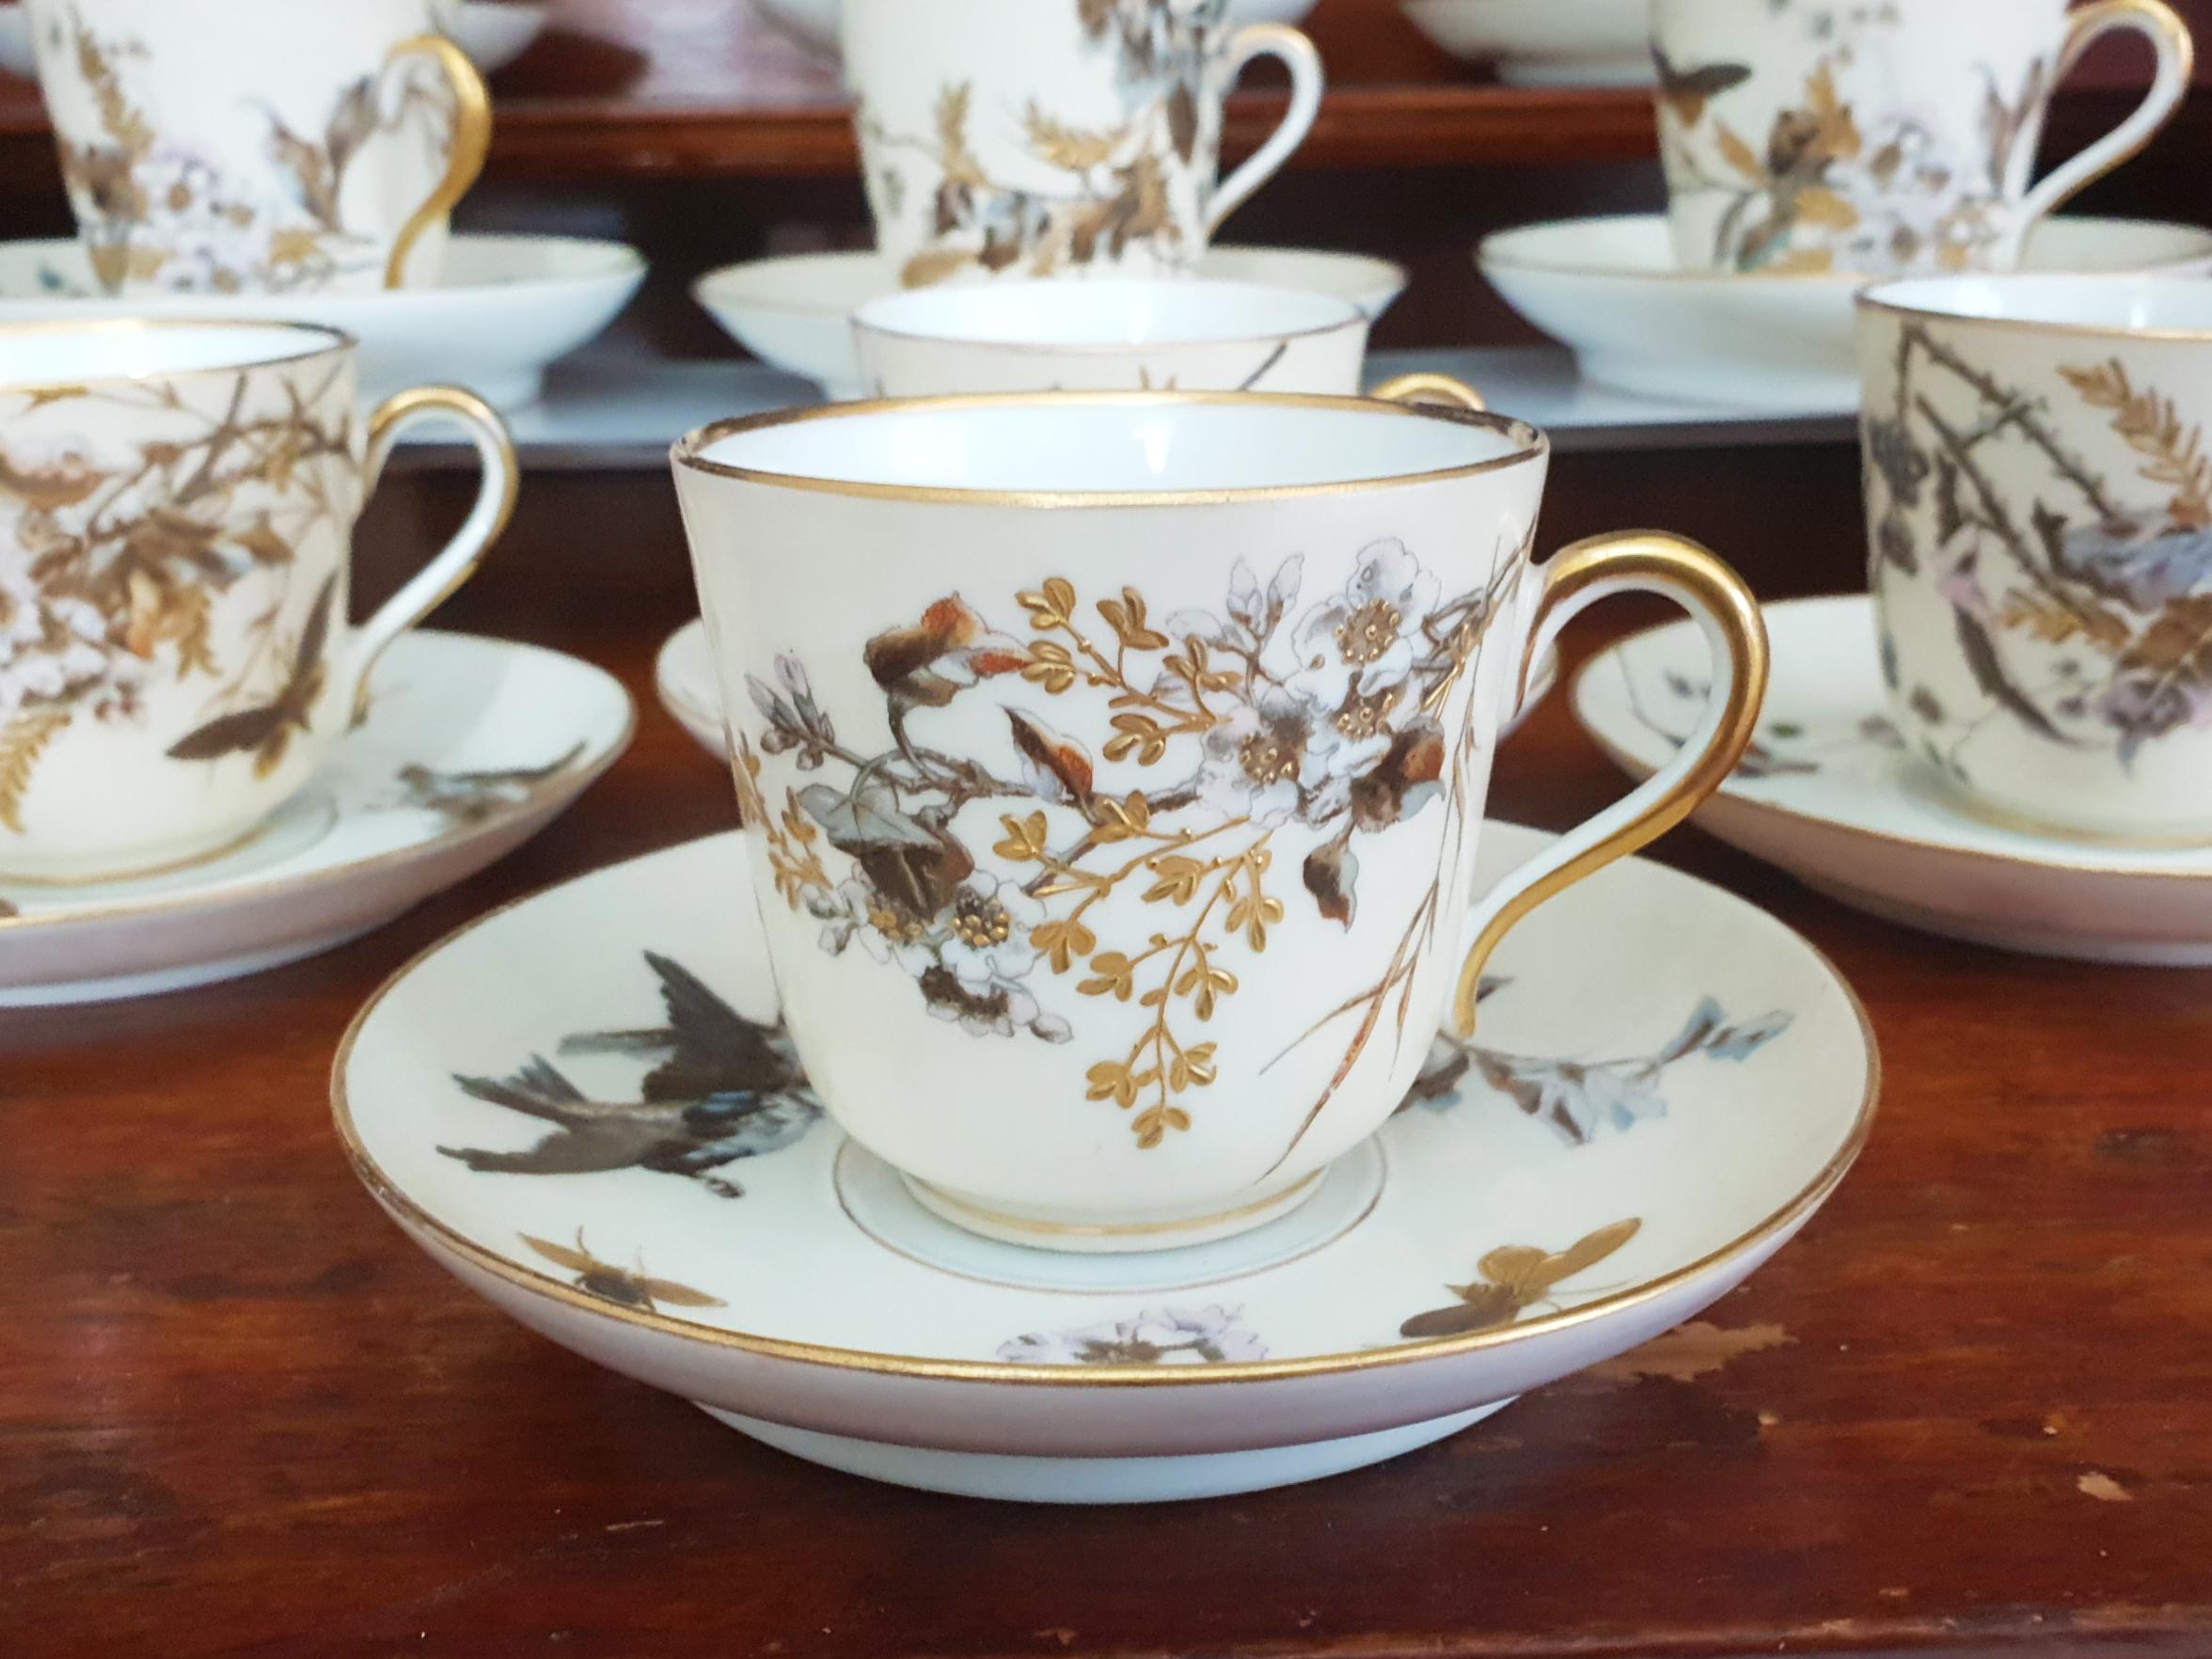 A Pirkenhammer Porcelain hand painted Tea Service service for 10 persons. This amazing set consist of 10 plates and 10 saucers, a total of 20 pieces.
All handpainted in the Aesthetic Movement style with butterflies, dragonflies, birds, bees,